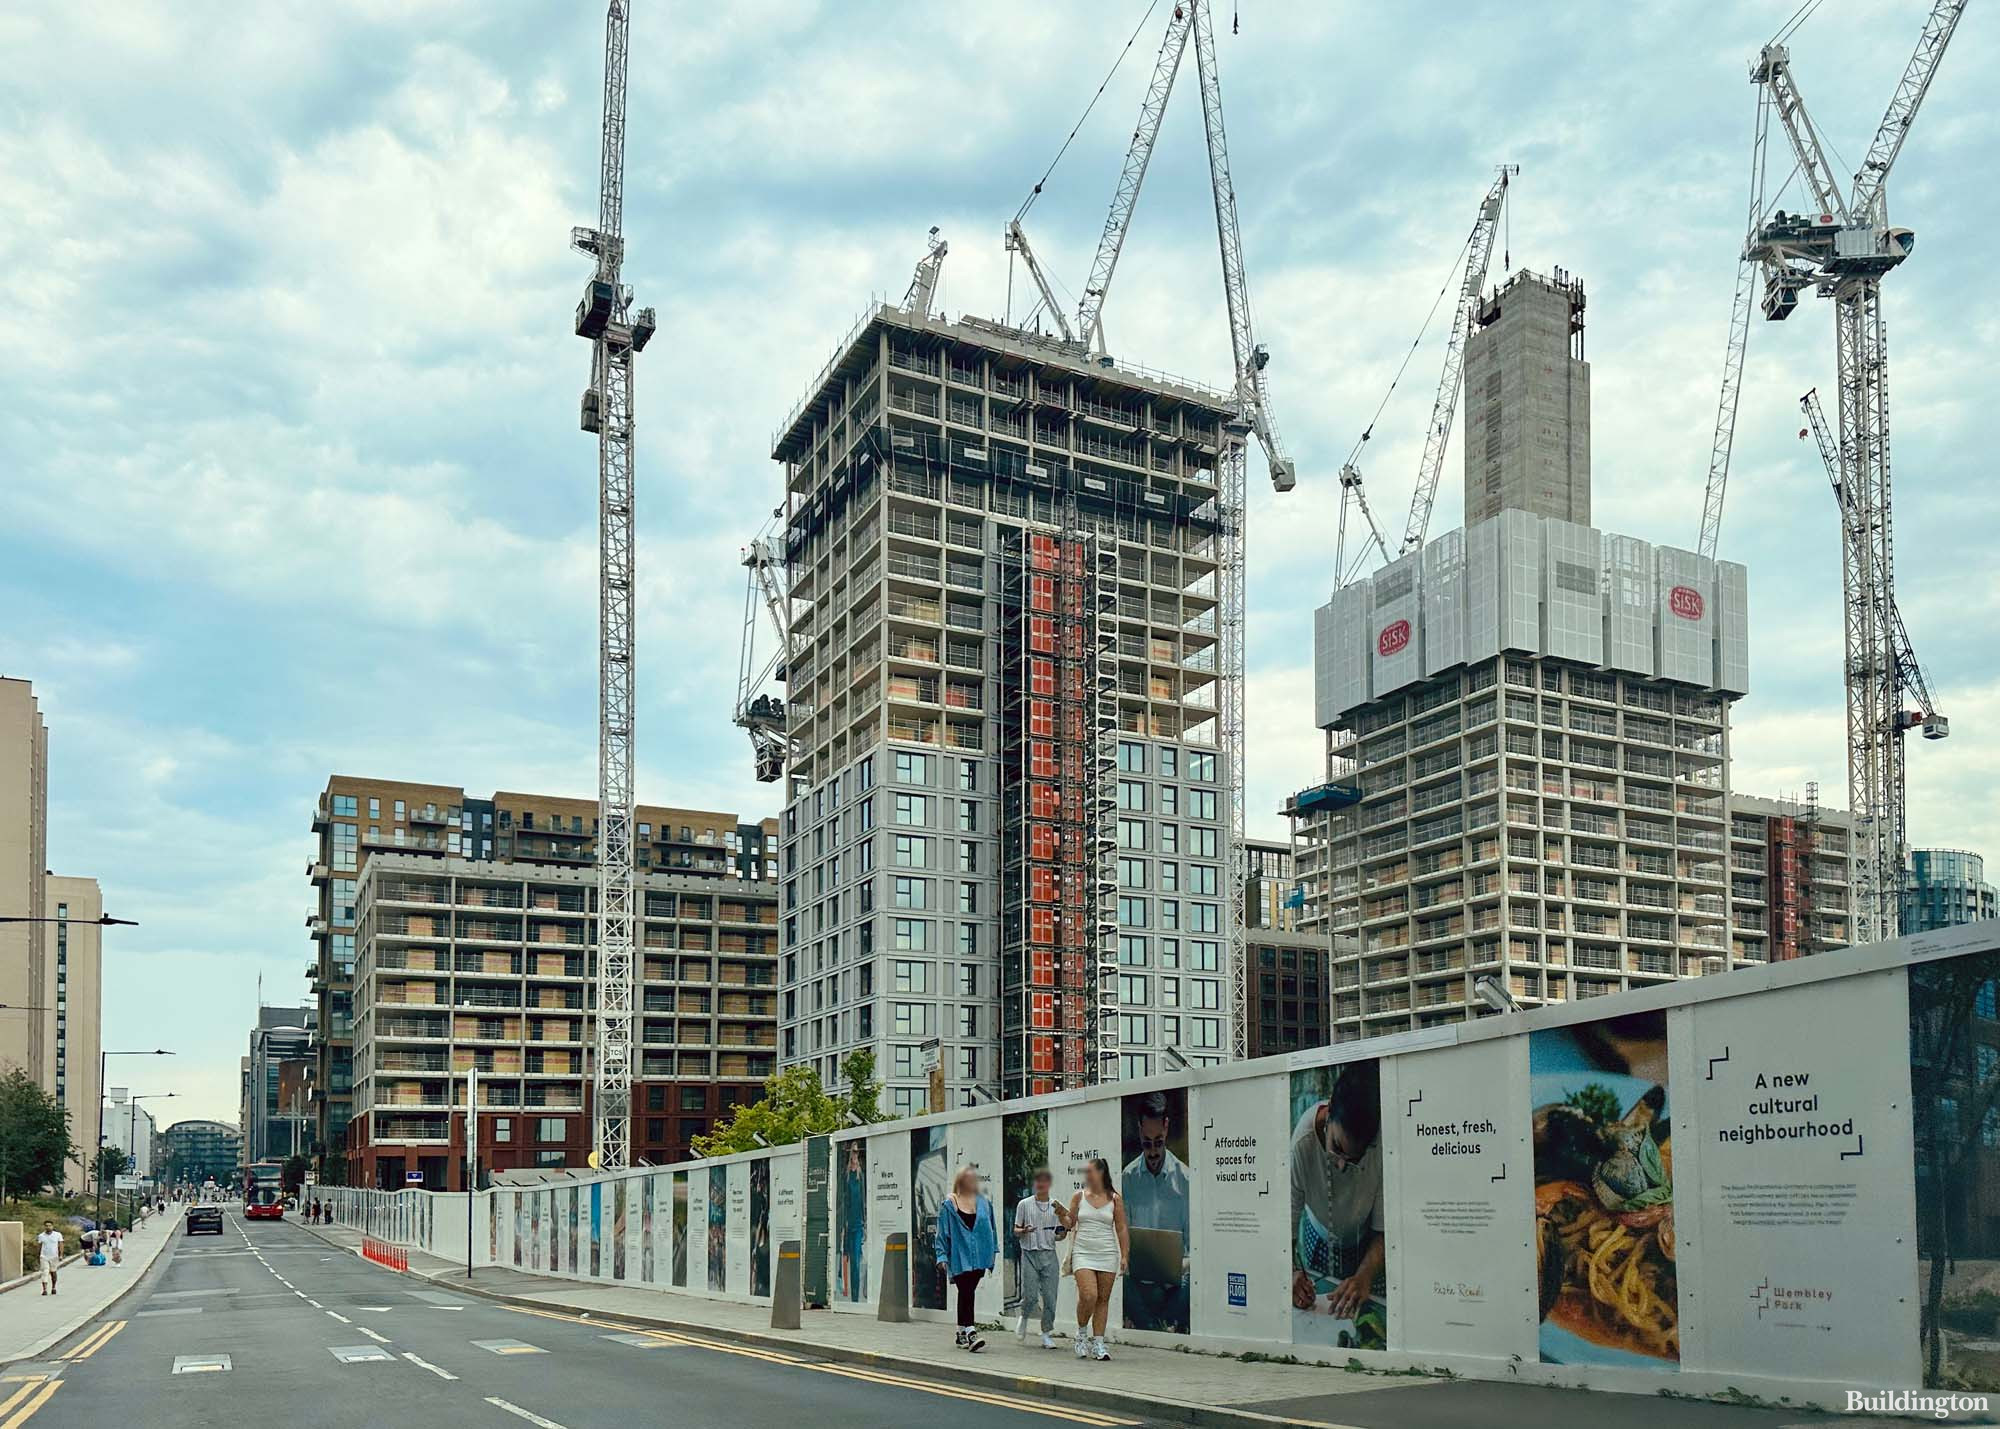 North East Lands development on Engineers Way in Wembley Park, Greater London HA9